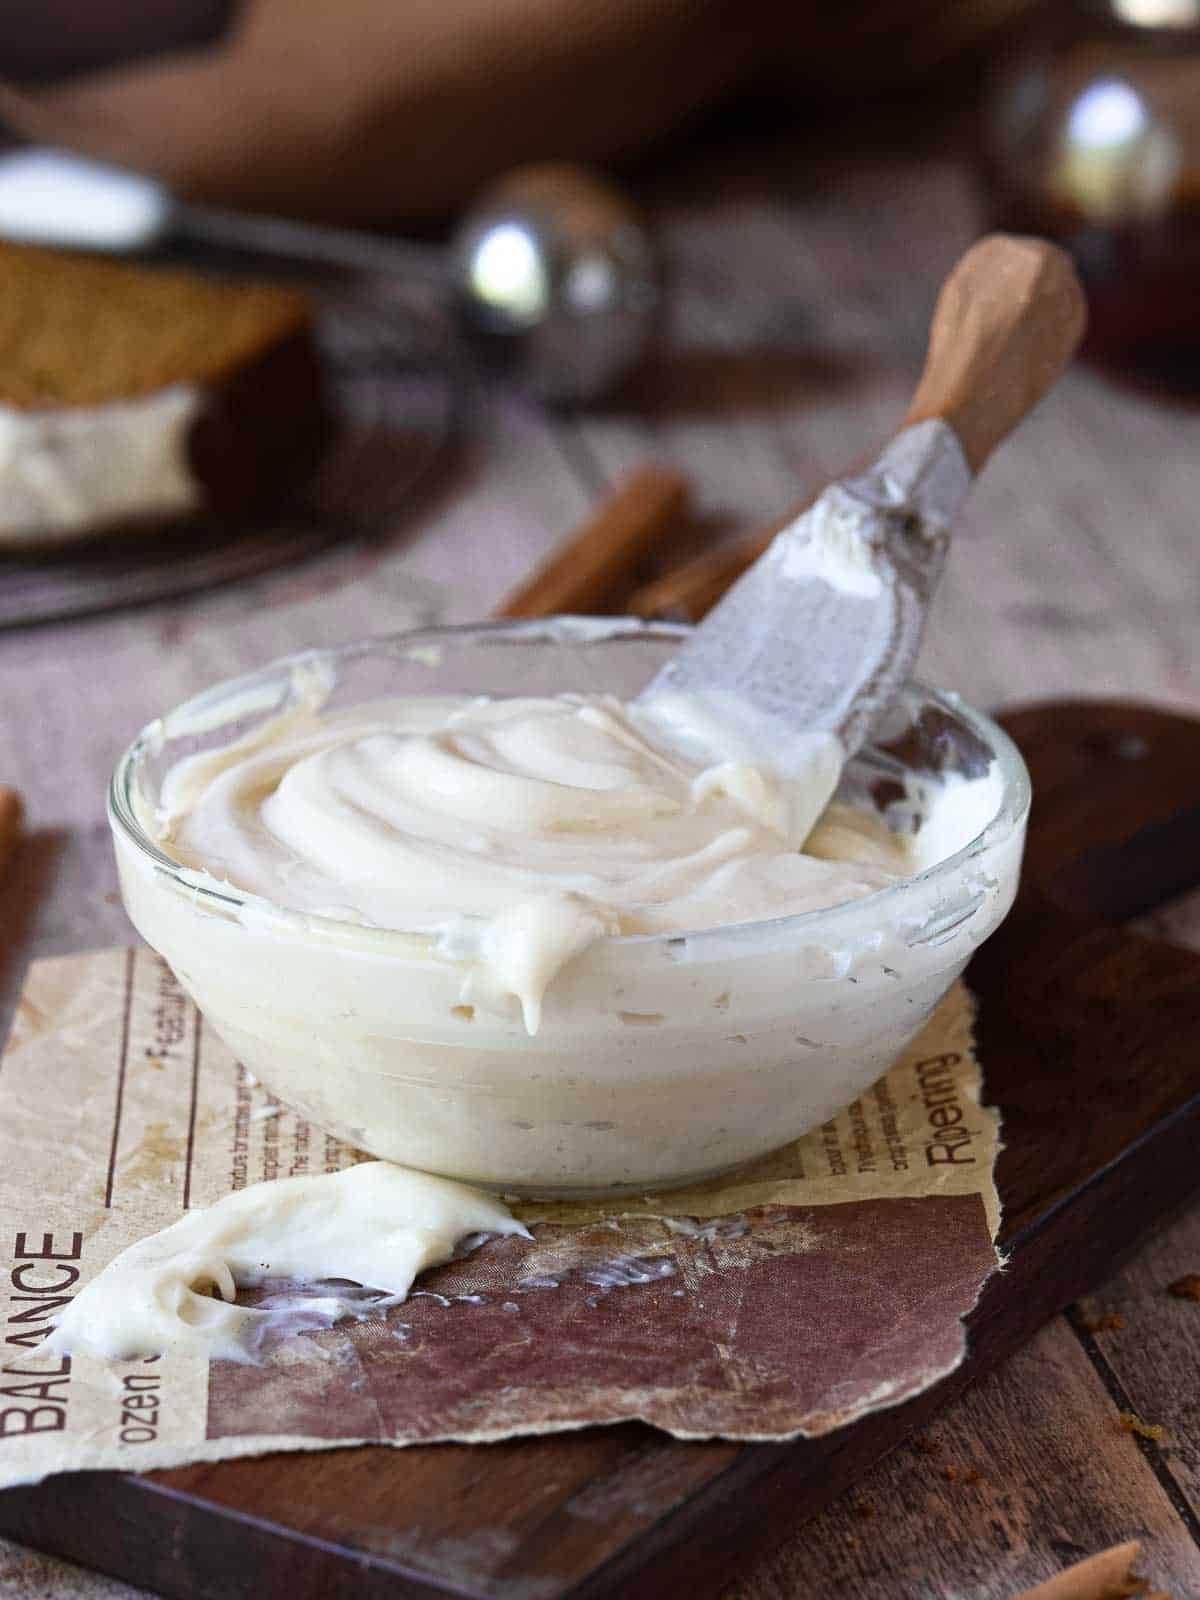 Cream cheese frosting in a clear bowl on a wood surface.